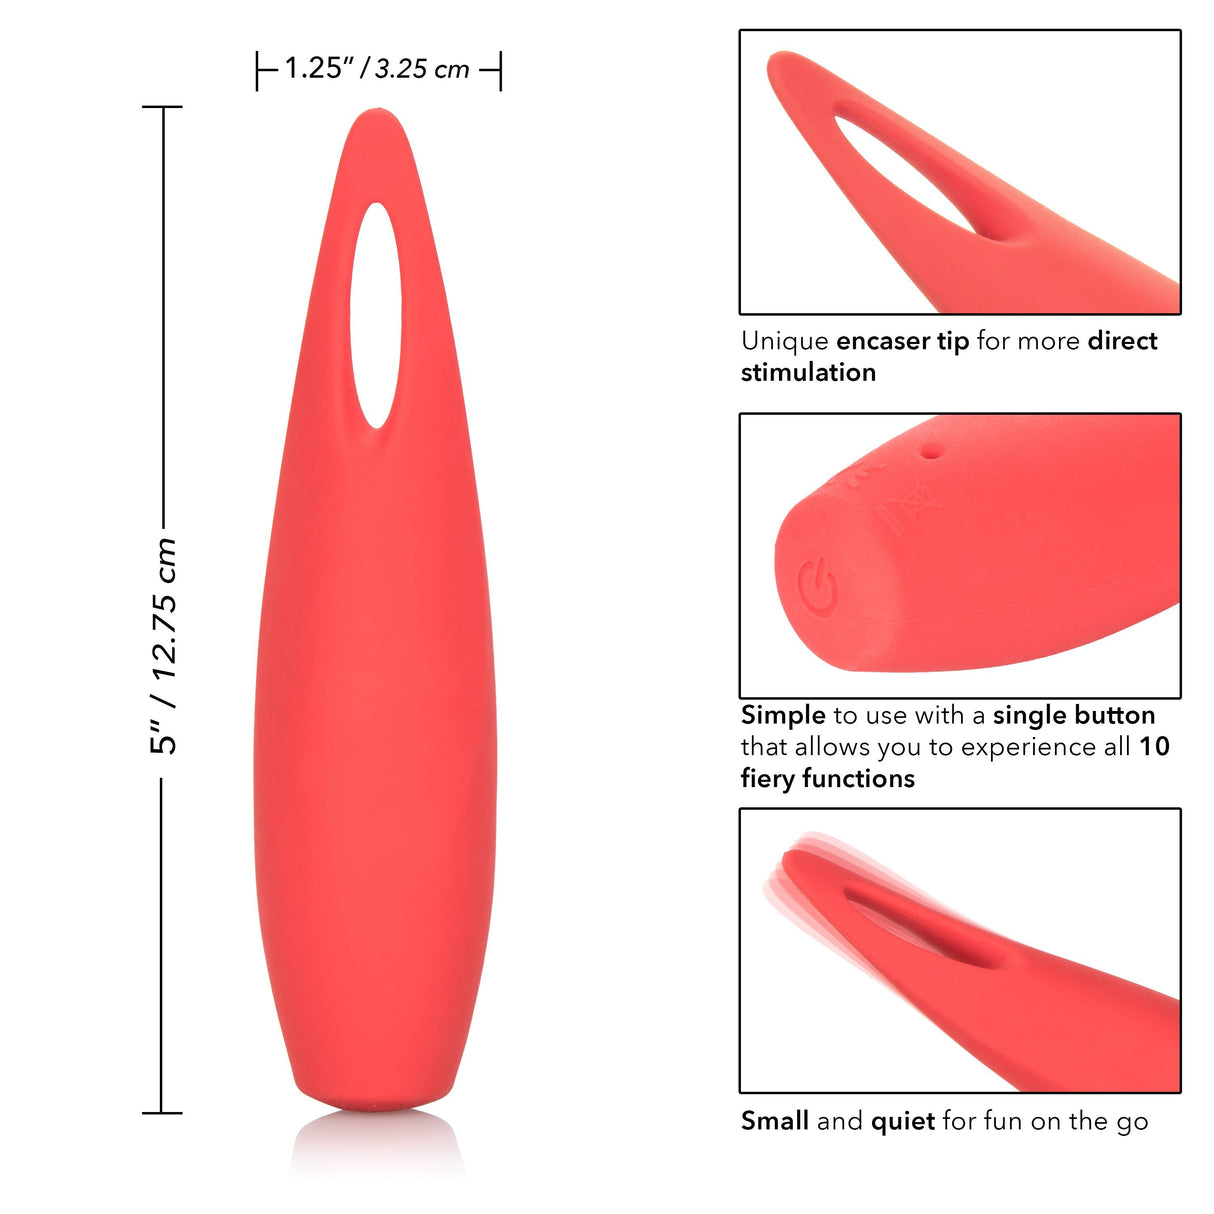 California Exotics - Red Hot Spark Rechargeable Clit Massager (Red) CE1586 CherryAffairs